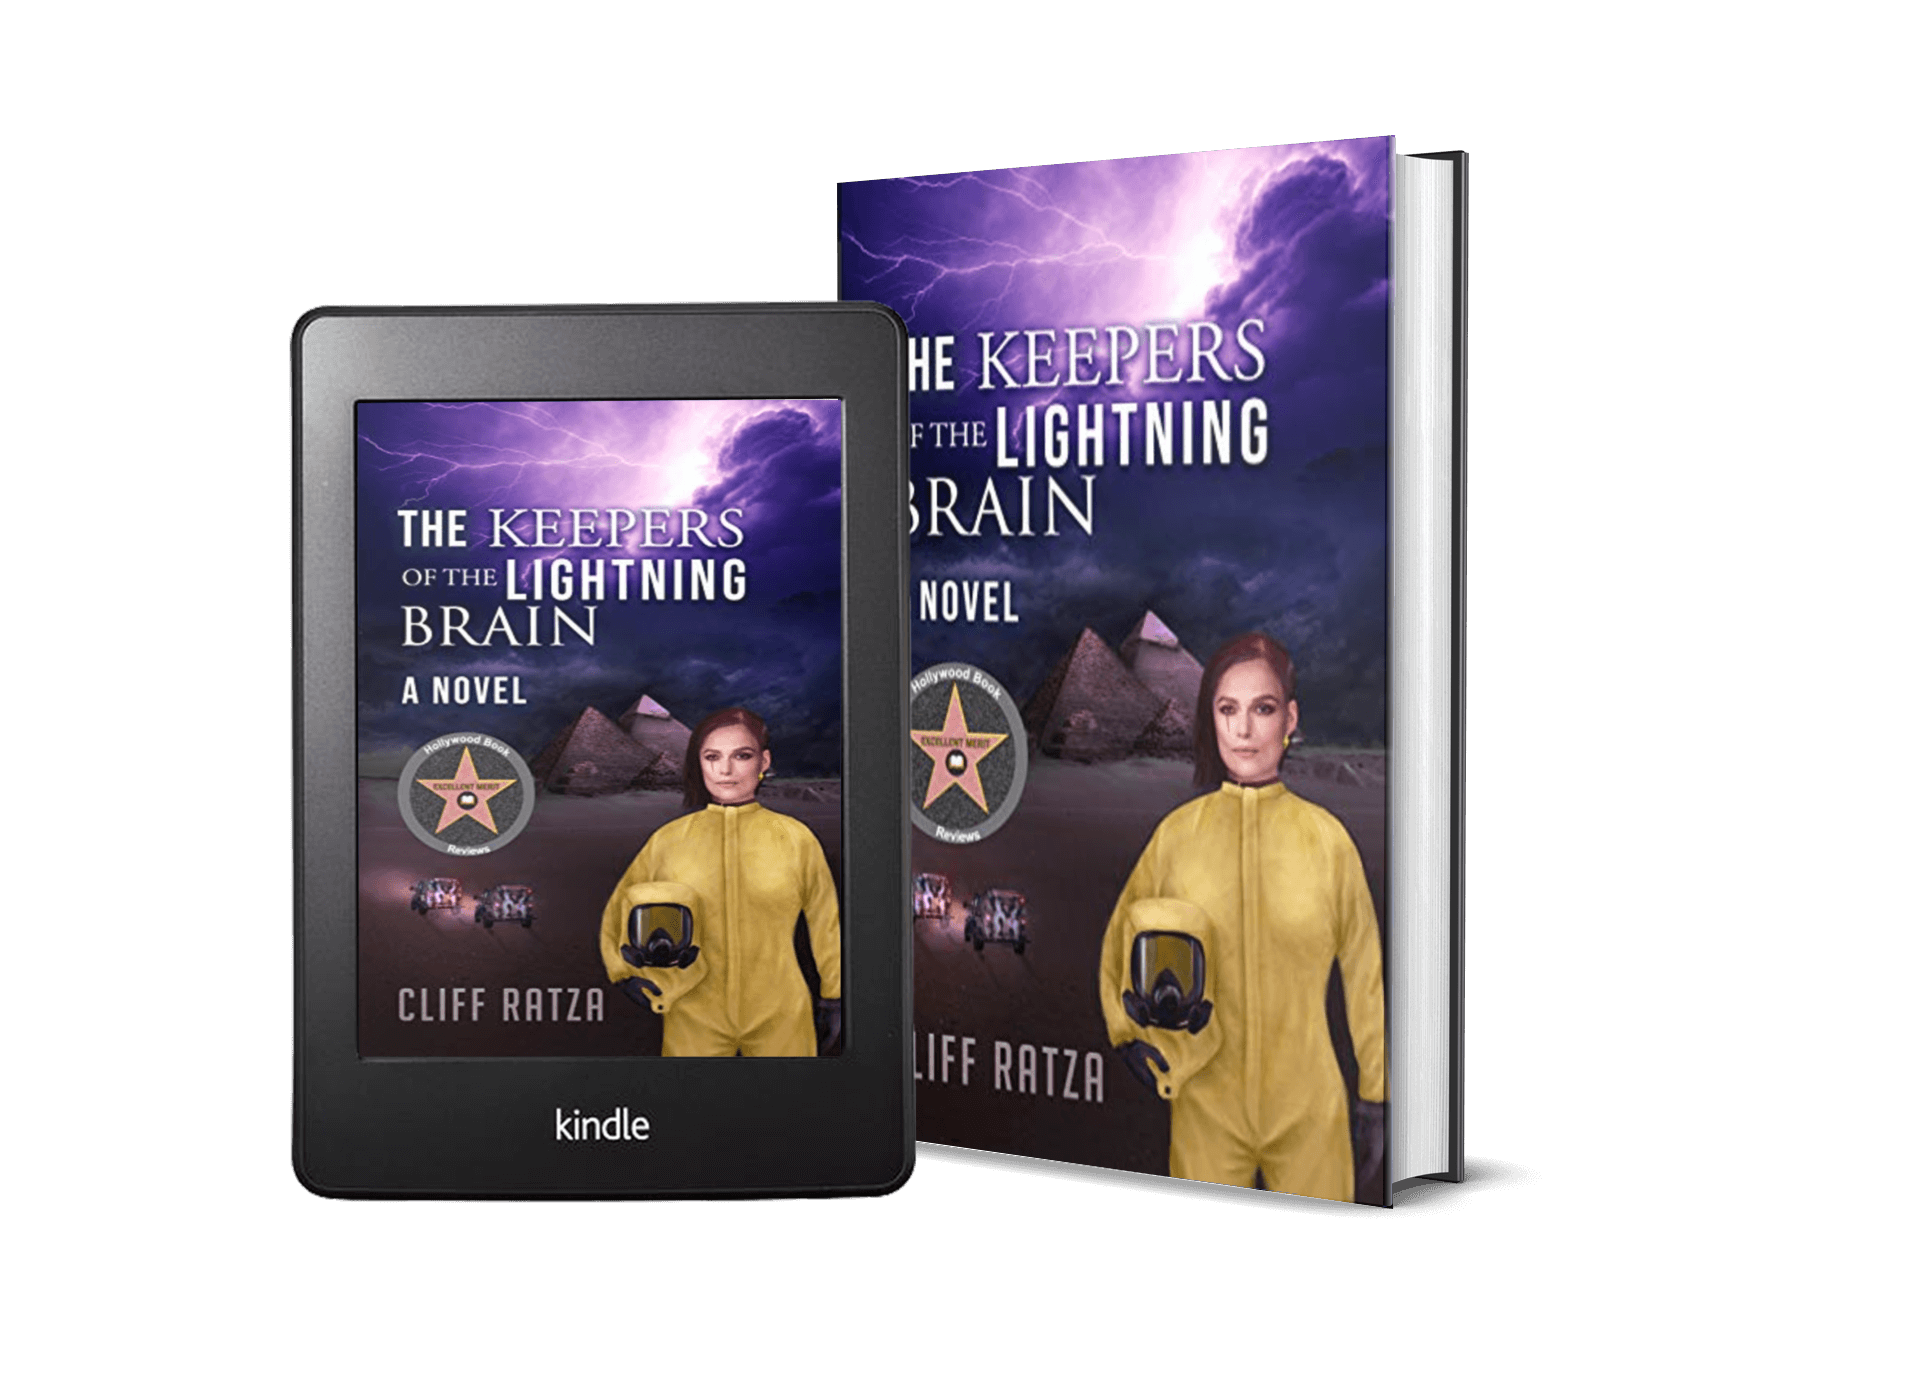 The Keepers of The Leightning Brain Book and a Kindle